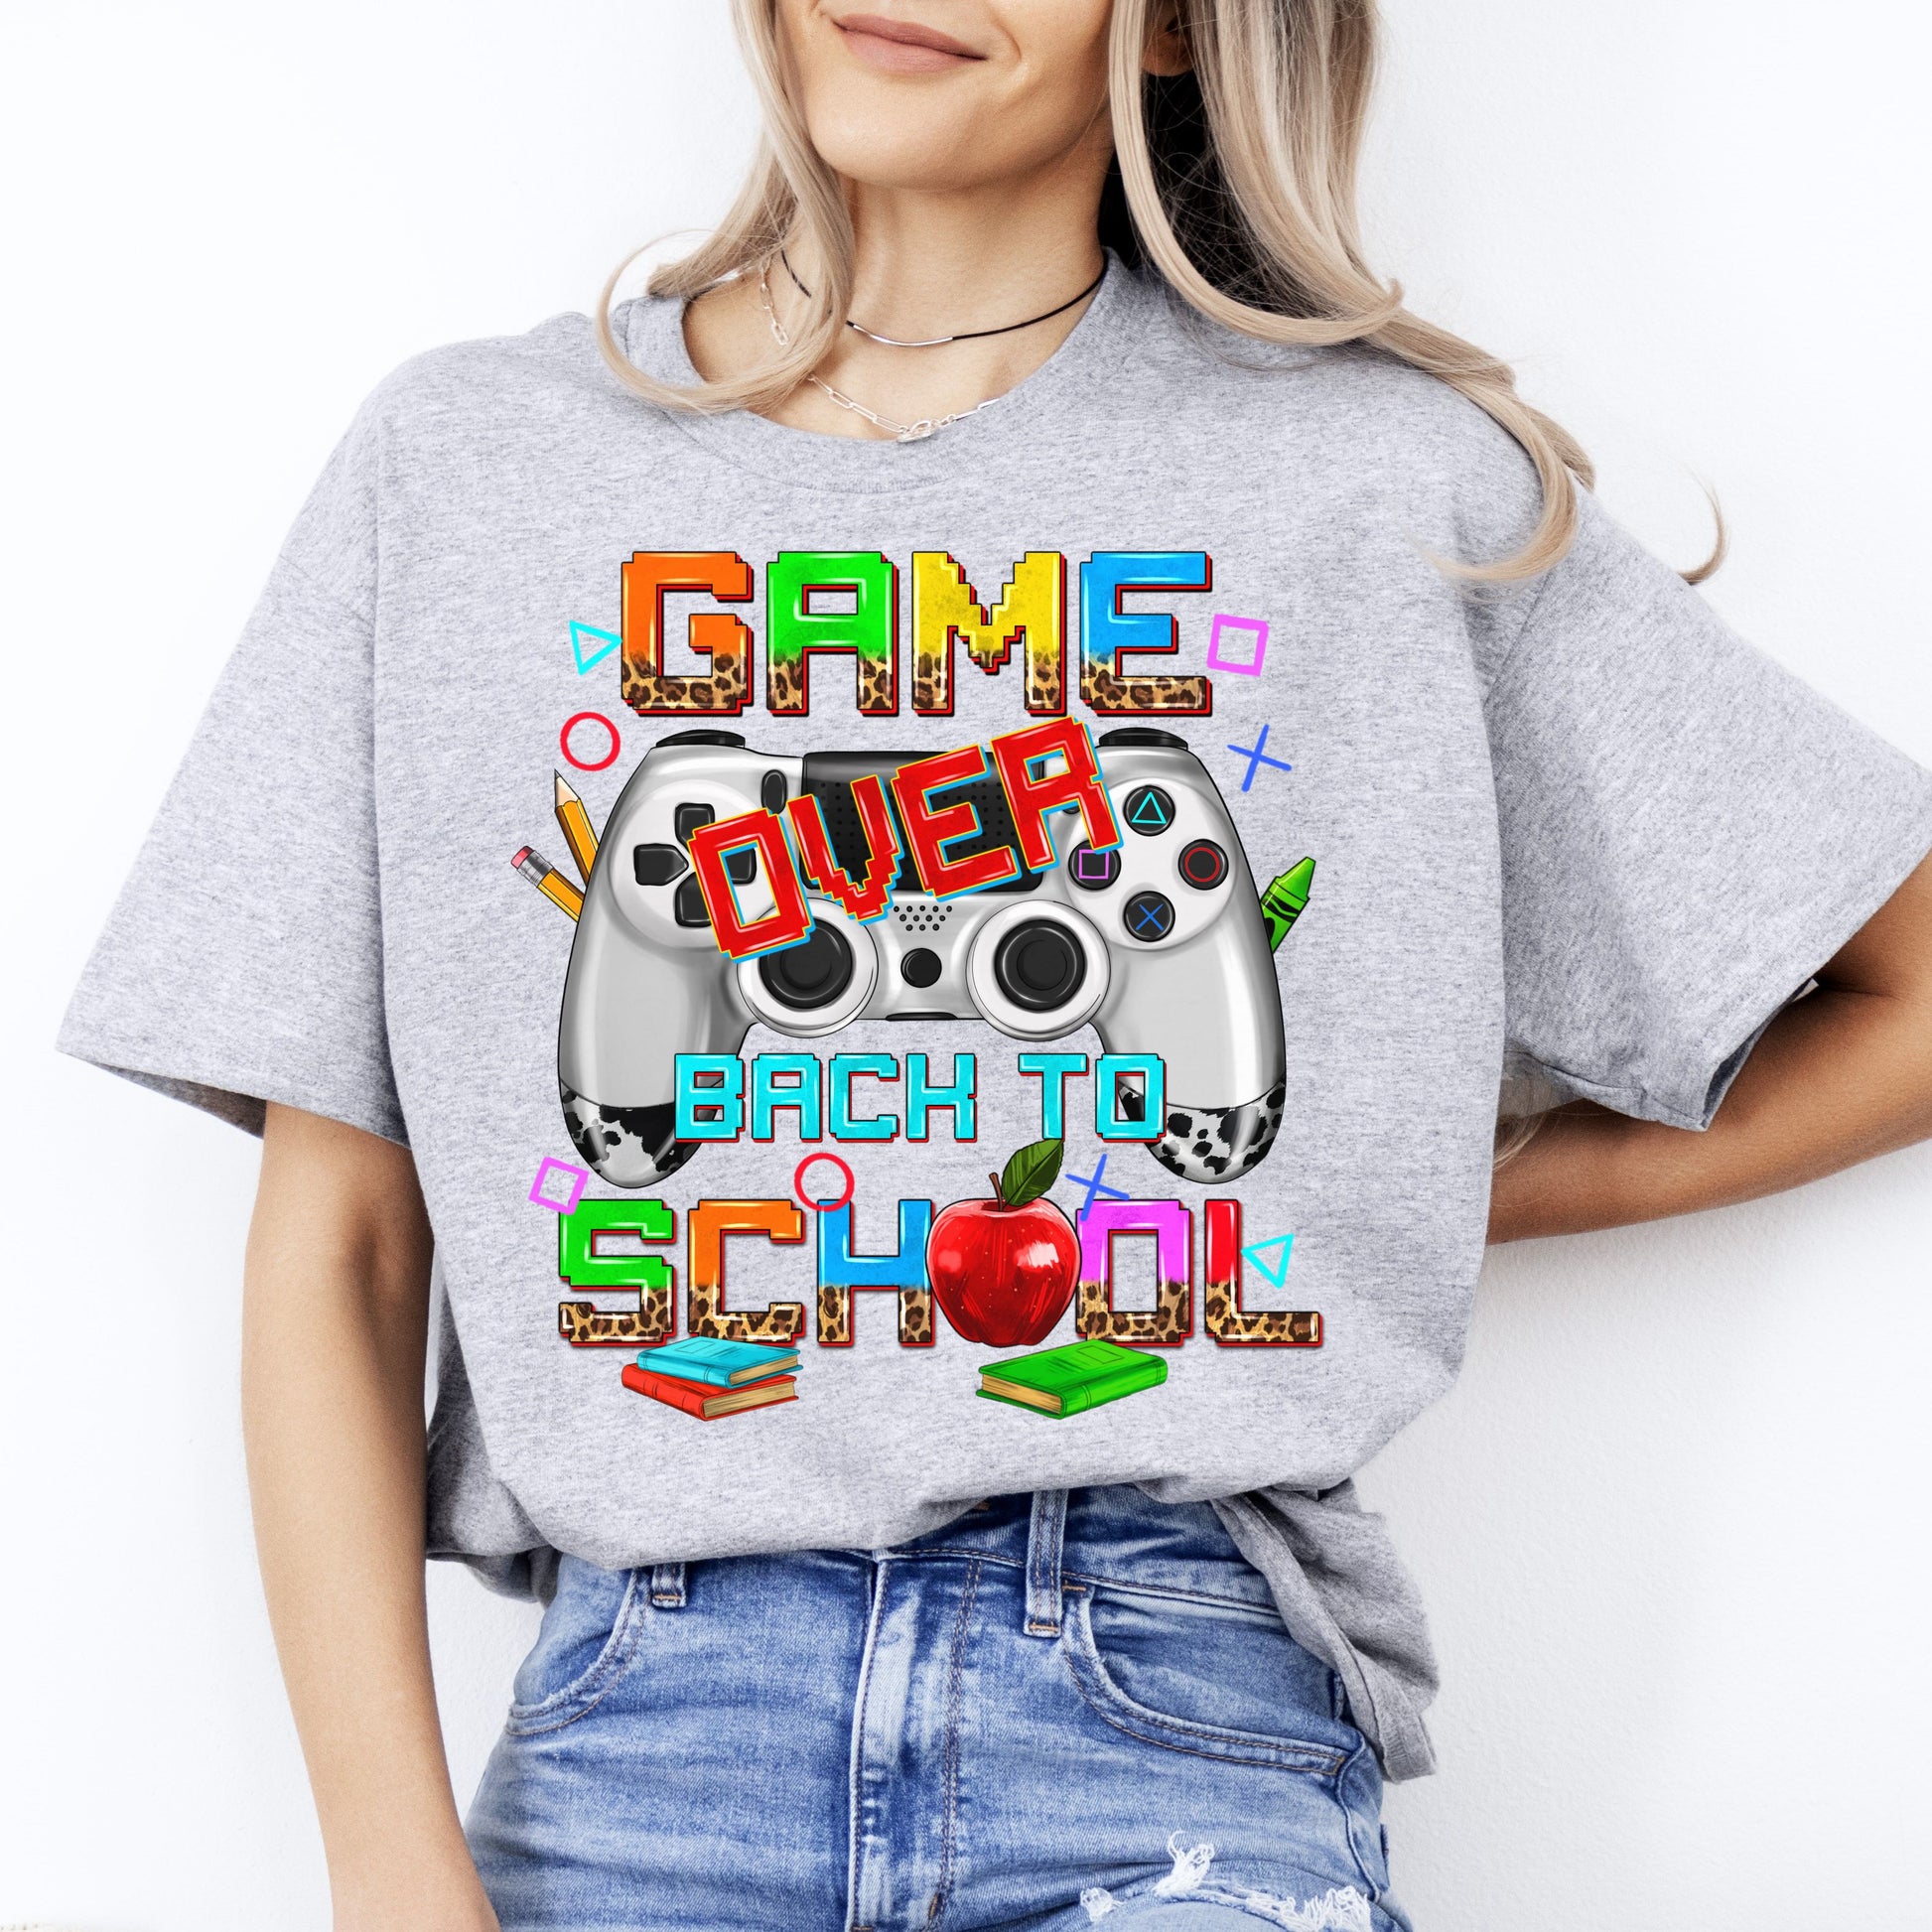 Back to school teacher T-Shirt gift Game over back to school game console Unisex tee Sand White Sport Grey-Sport Grey-Family-Gift-Planet